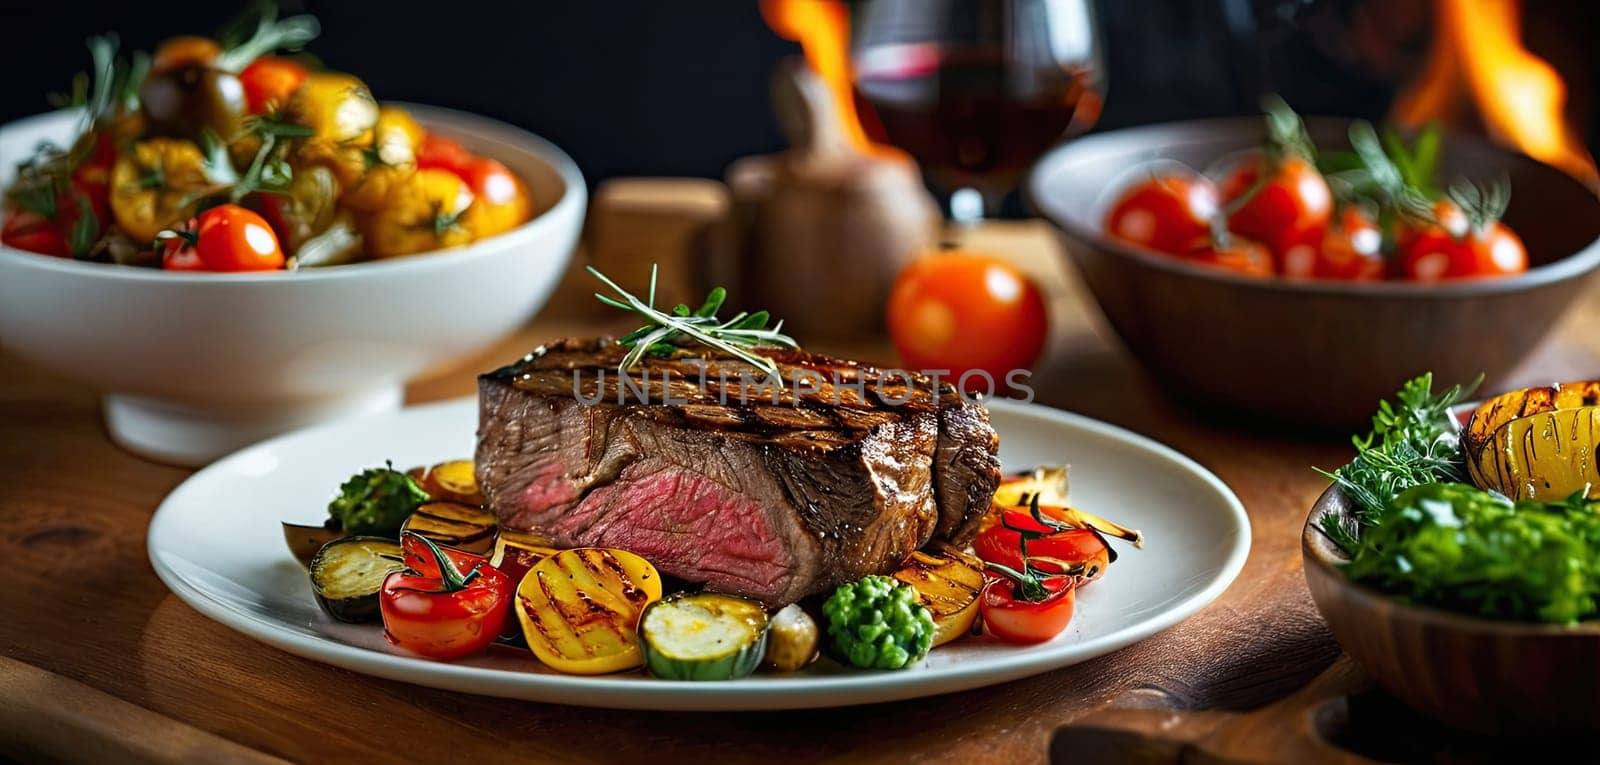 Grilled beef, dinner, vegetables. Succulent grilled beef surrounded by colorful roasted vegetables displayed on a rustic wooden board